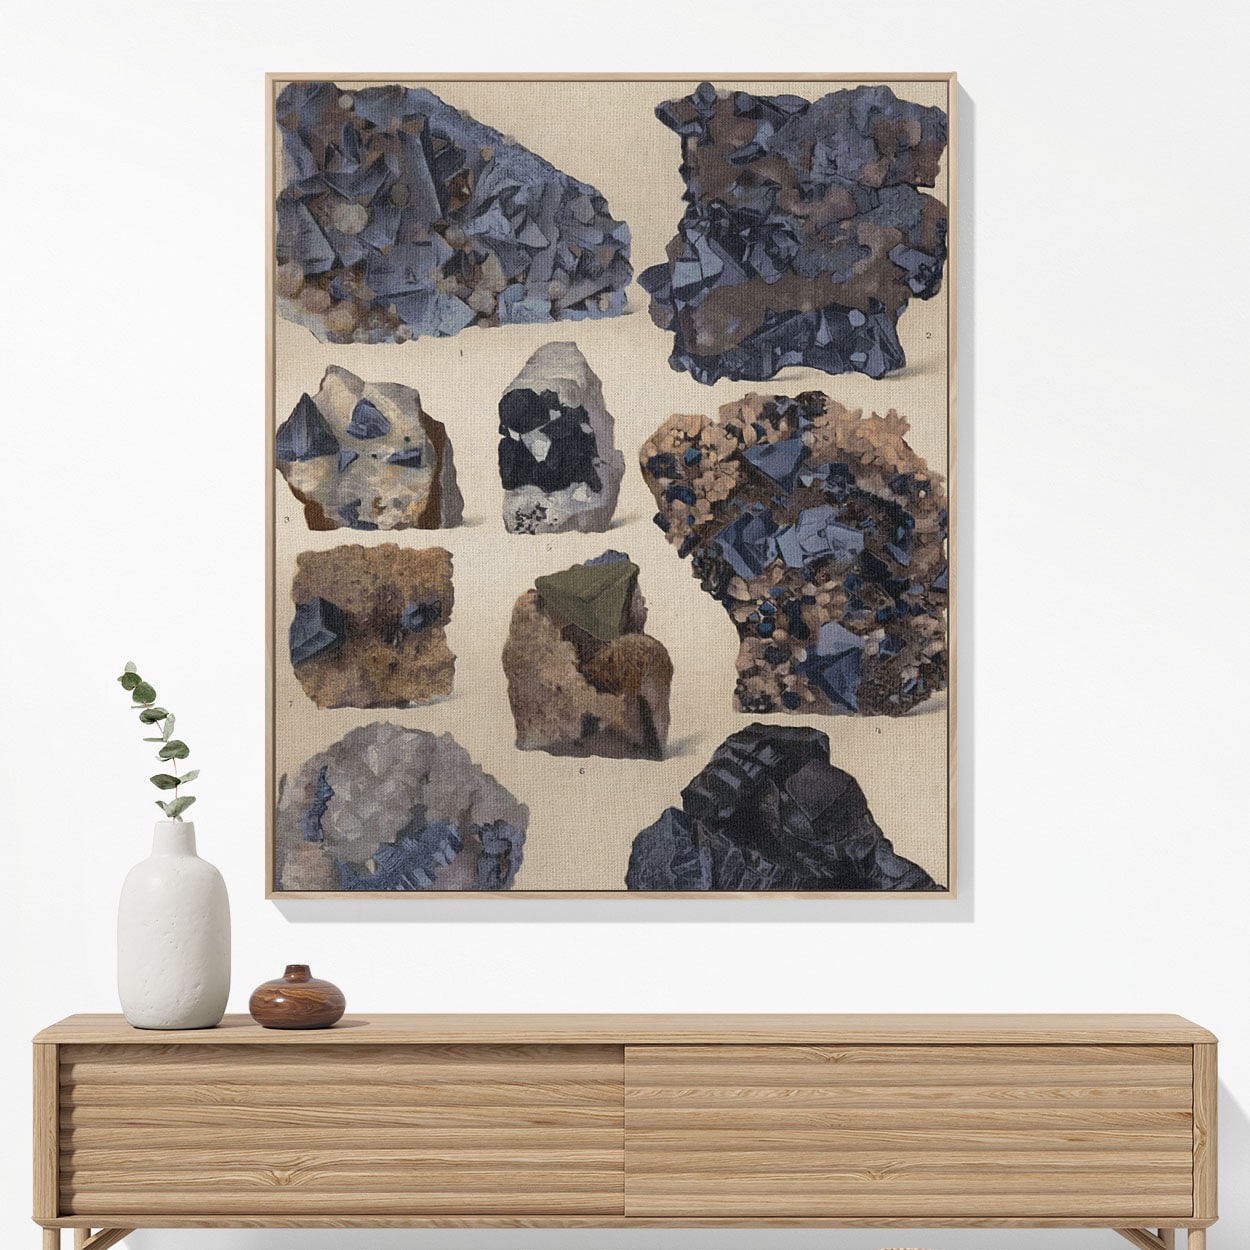 Vintage Rocks and Crystals Woven Blanket Woven Blanket Hanging on a Wall as Framed Wall Art